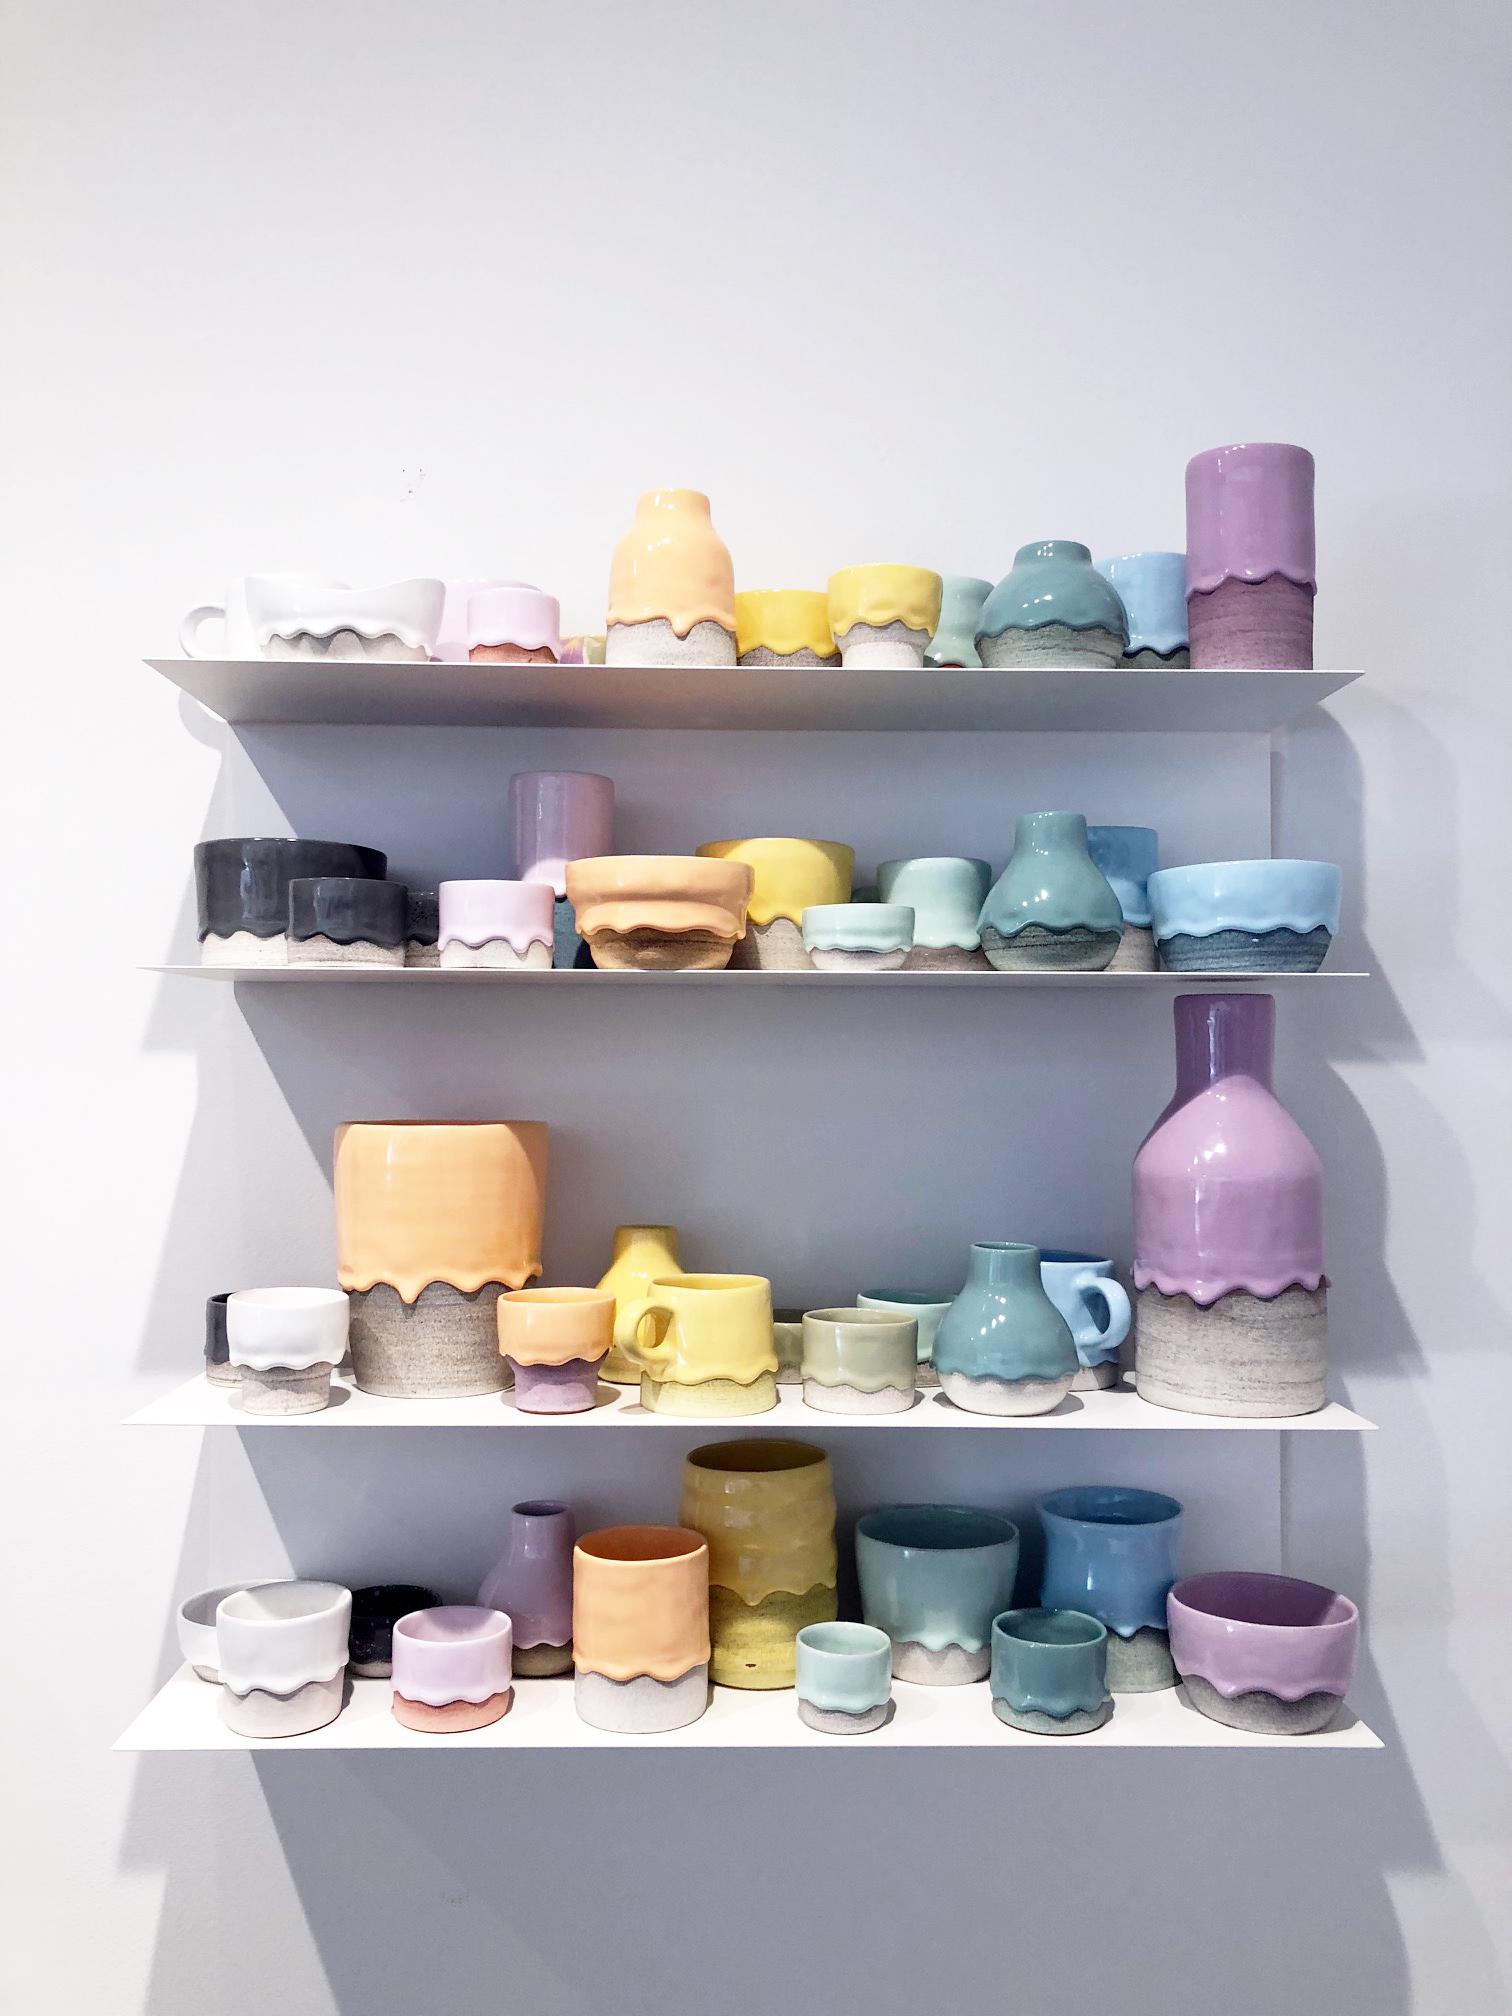 Ceramic Vessel Wall Installation with Shelving, 48 Individual Pieces, Colorful 1